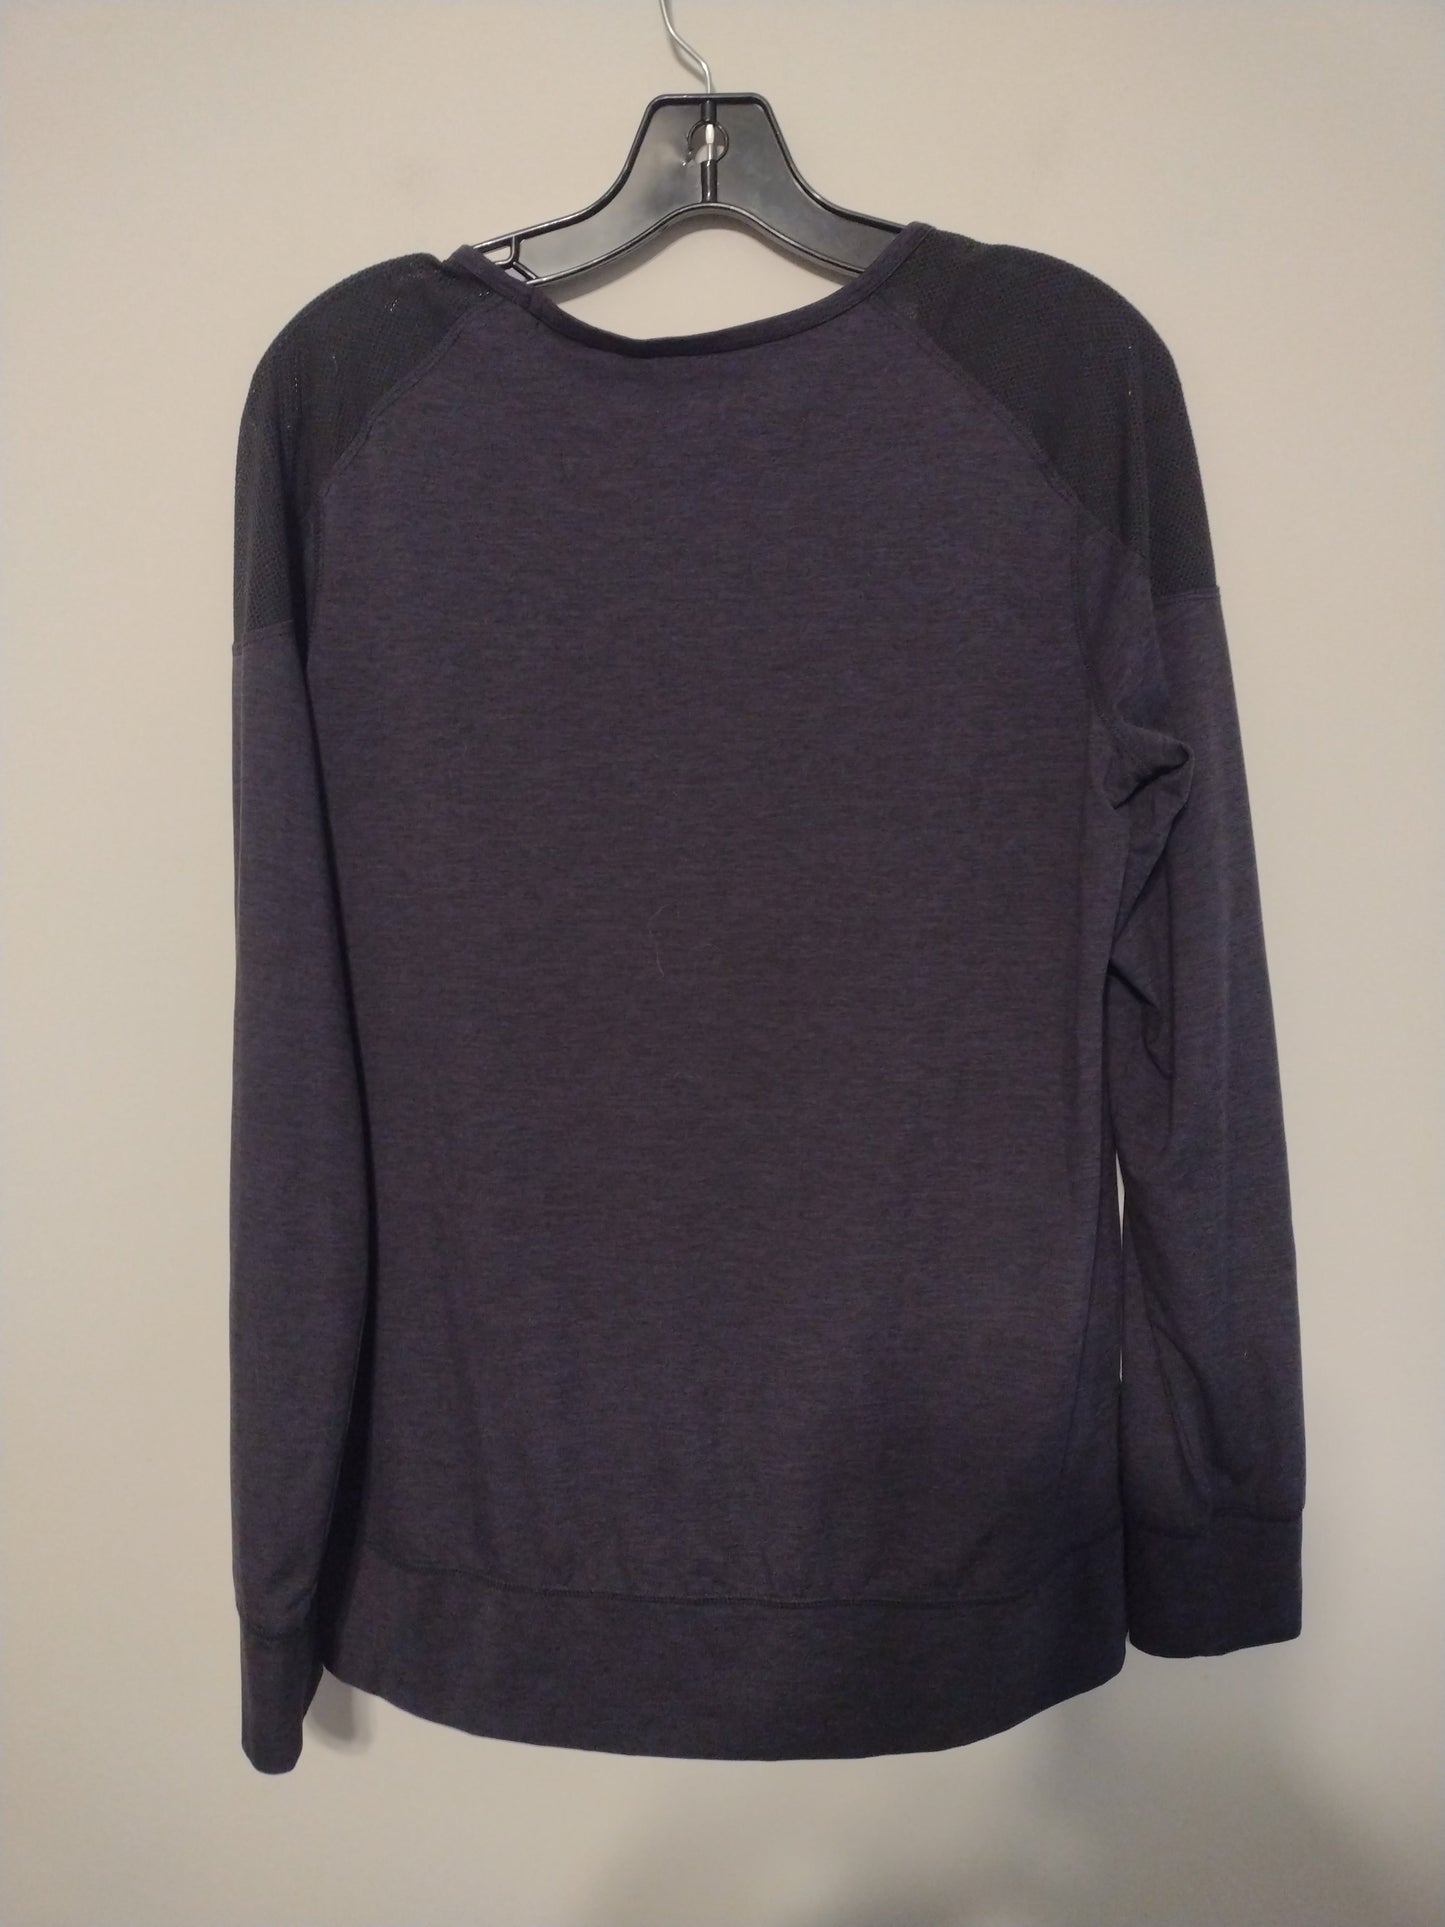 Athletic Top Long Sleeve Collar By Reebok  Size: M